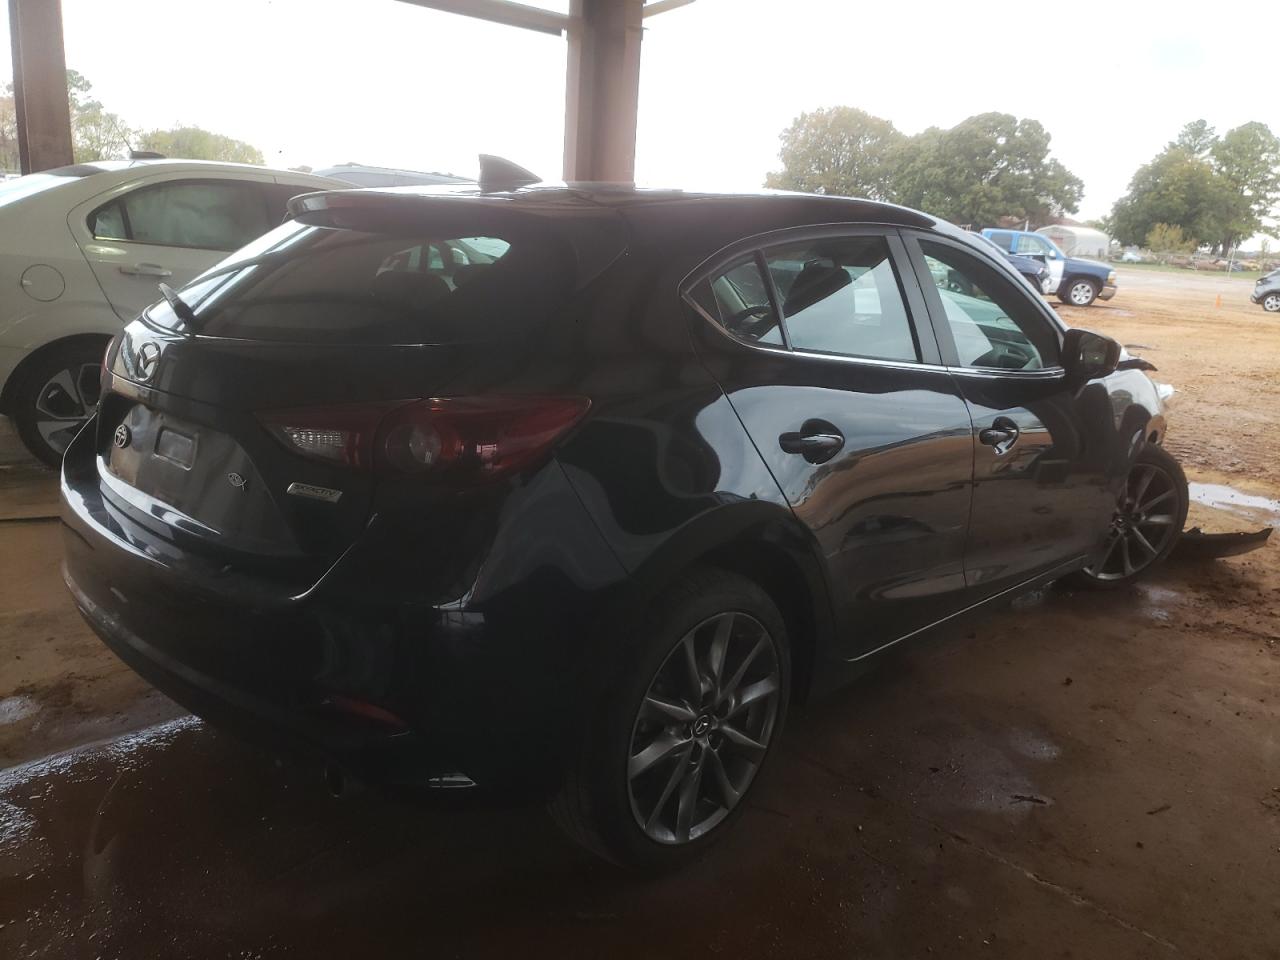 3MZBN1M32JM****** Salvage and Wrecked 2018 Mazda 3 in Alabama State